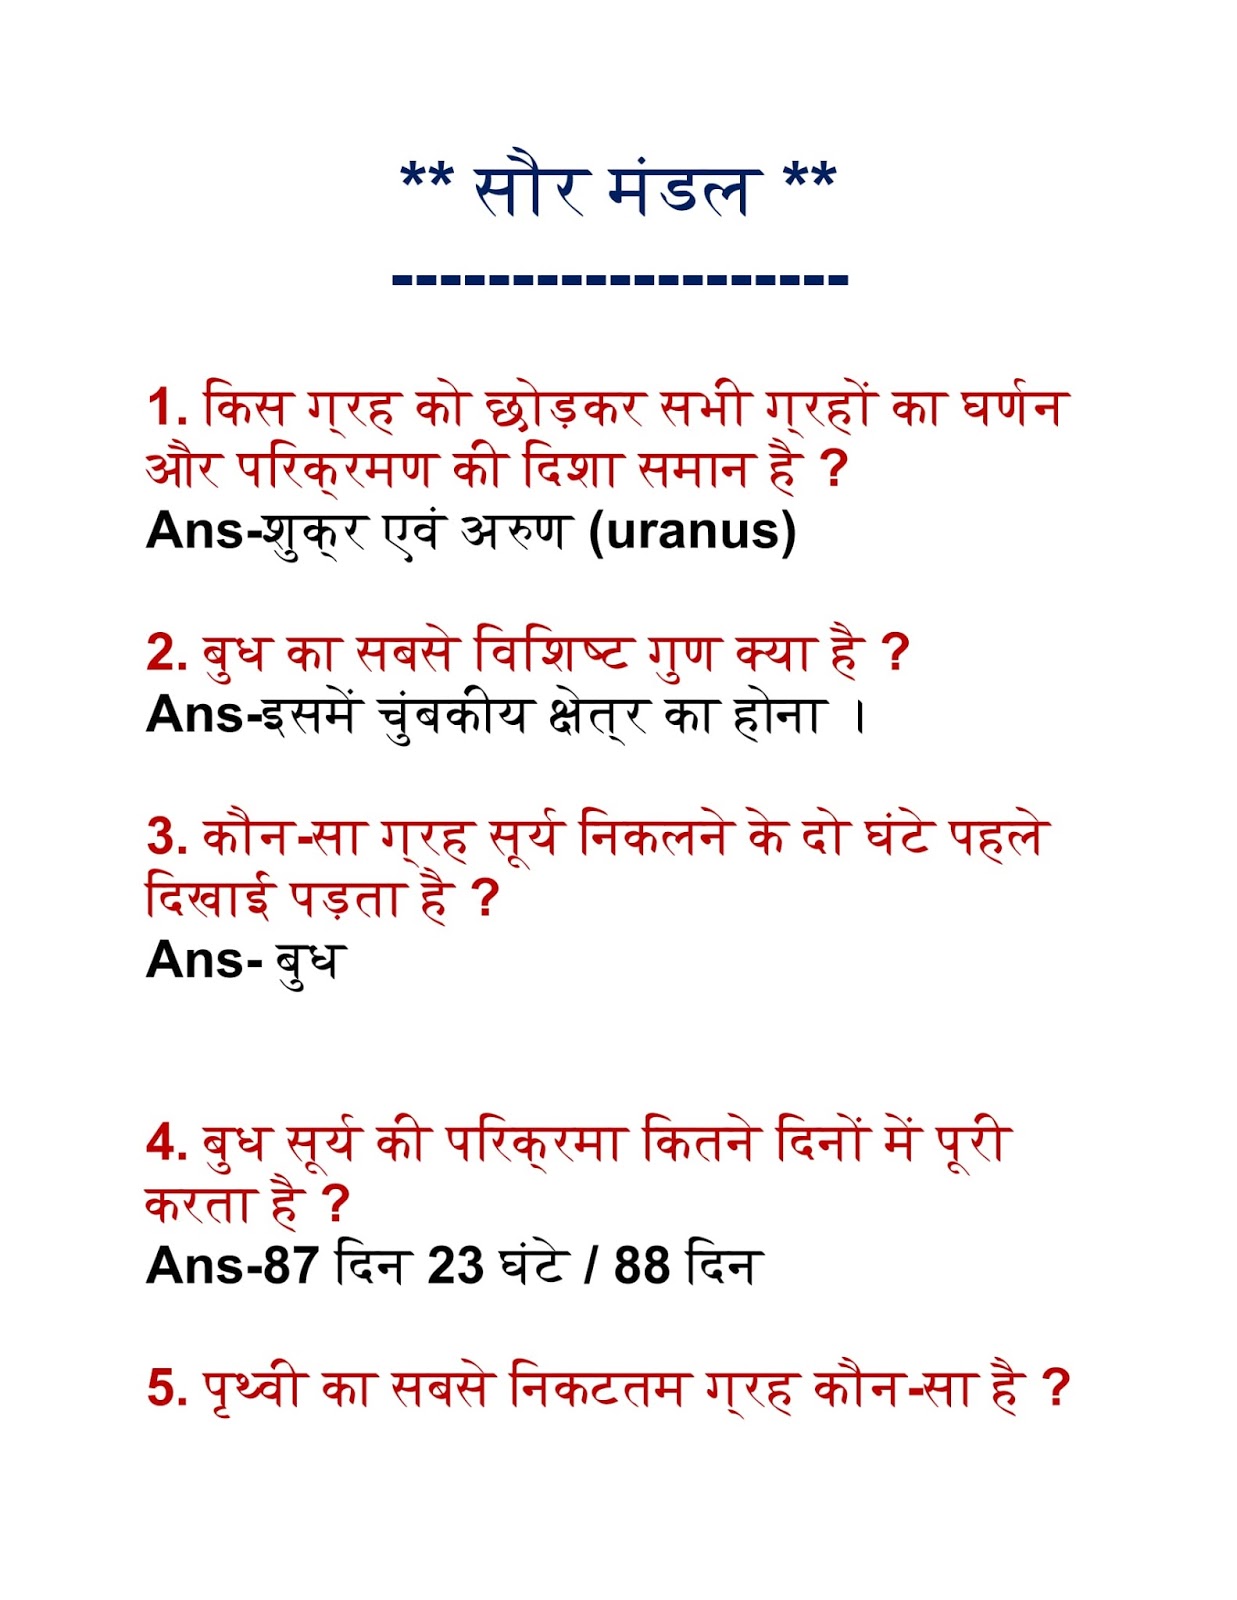 rrb gk question in hindi